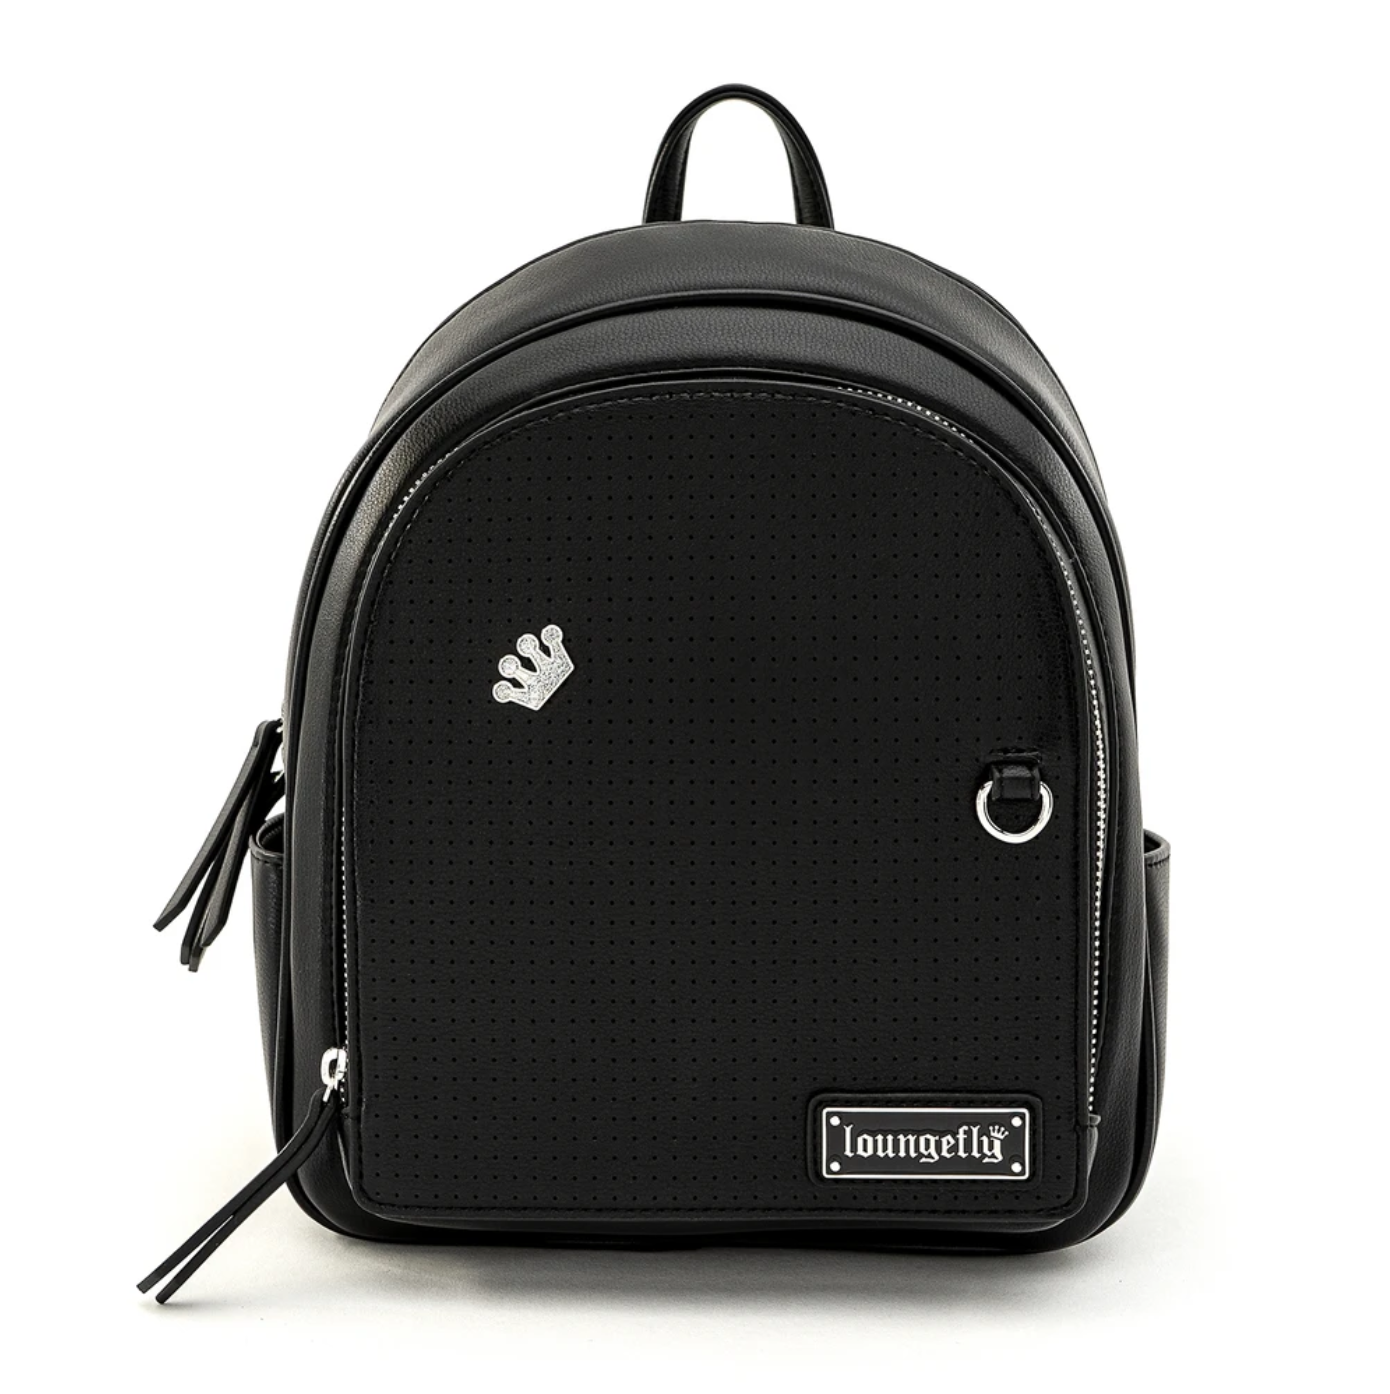 Loungefly Black Pin Trader Collector Mini Backpack & Enamel Crown Pin Loungefly LFBK0160